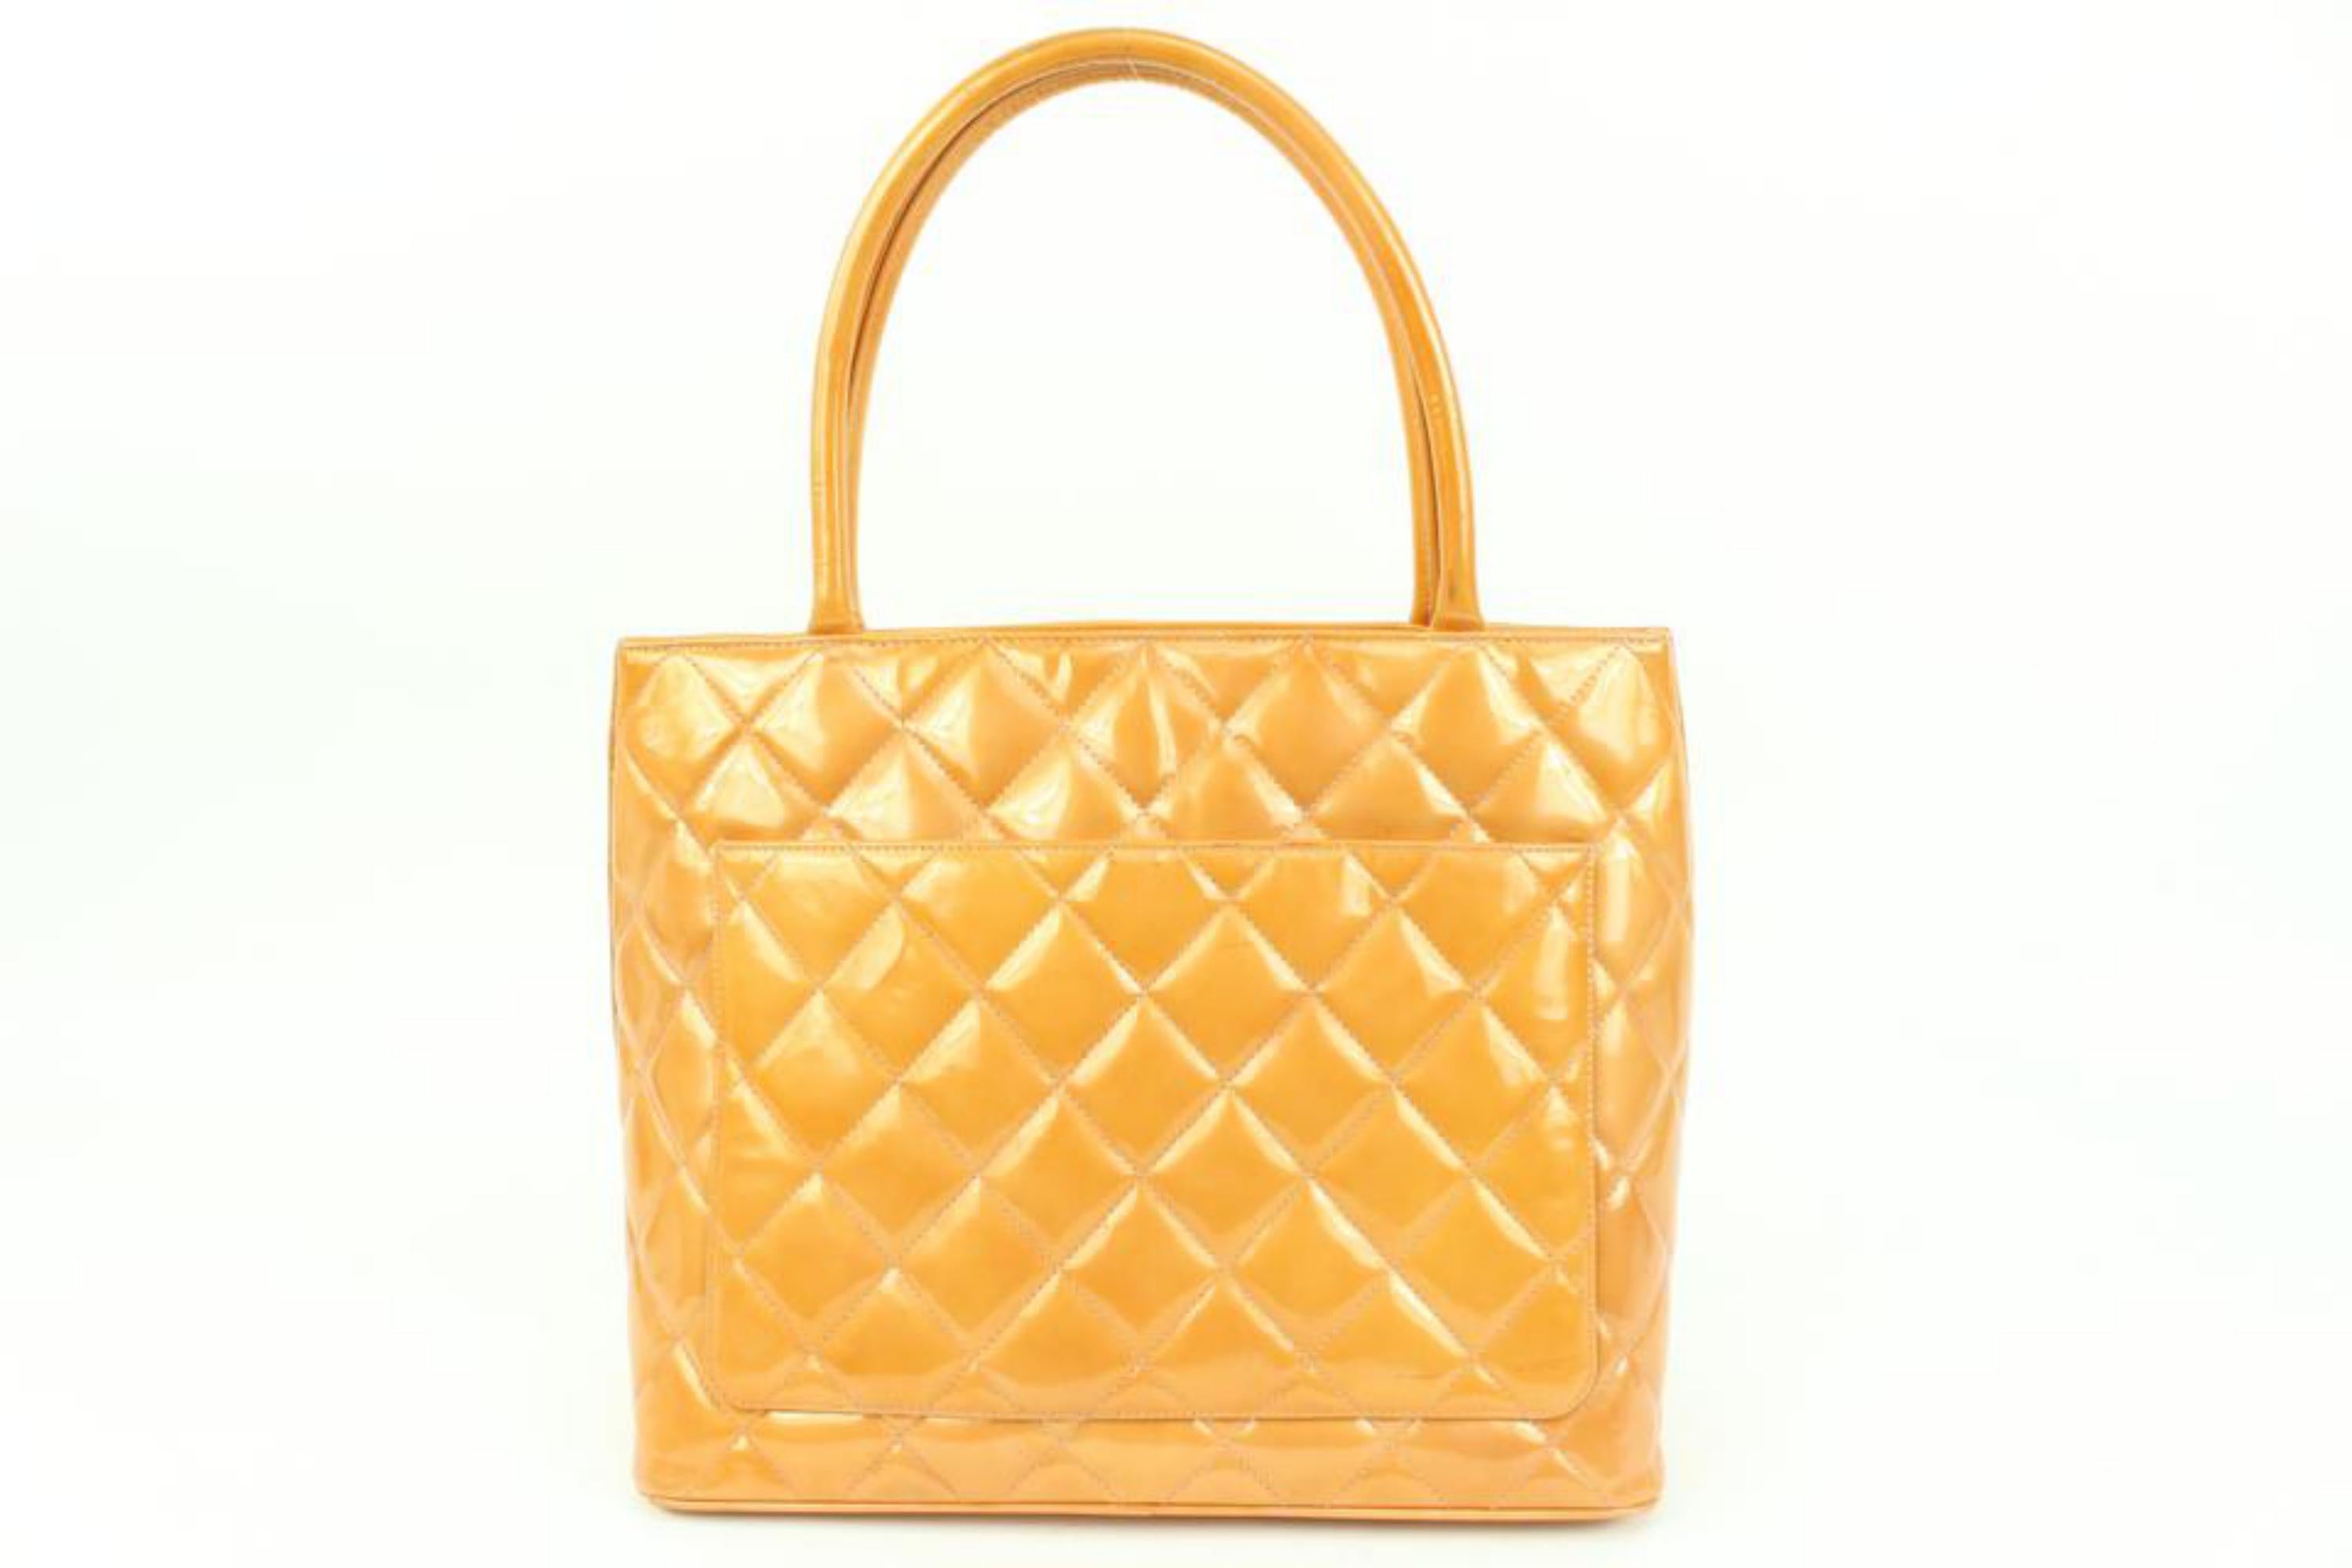 Women's Chanel Orange Quilted Patent Leather Zip Tote Bag 83ck328s